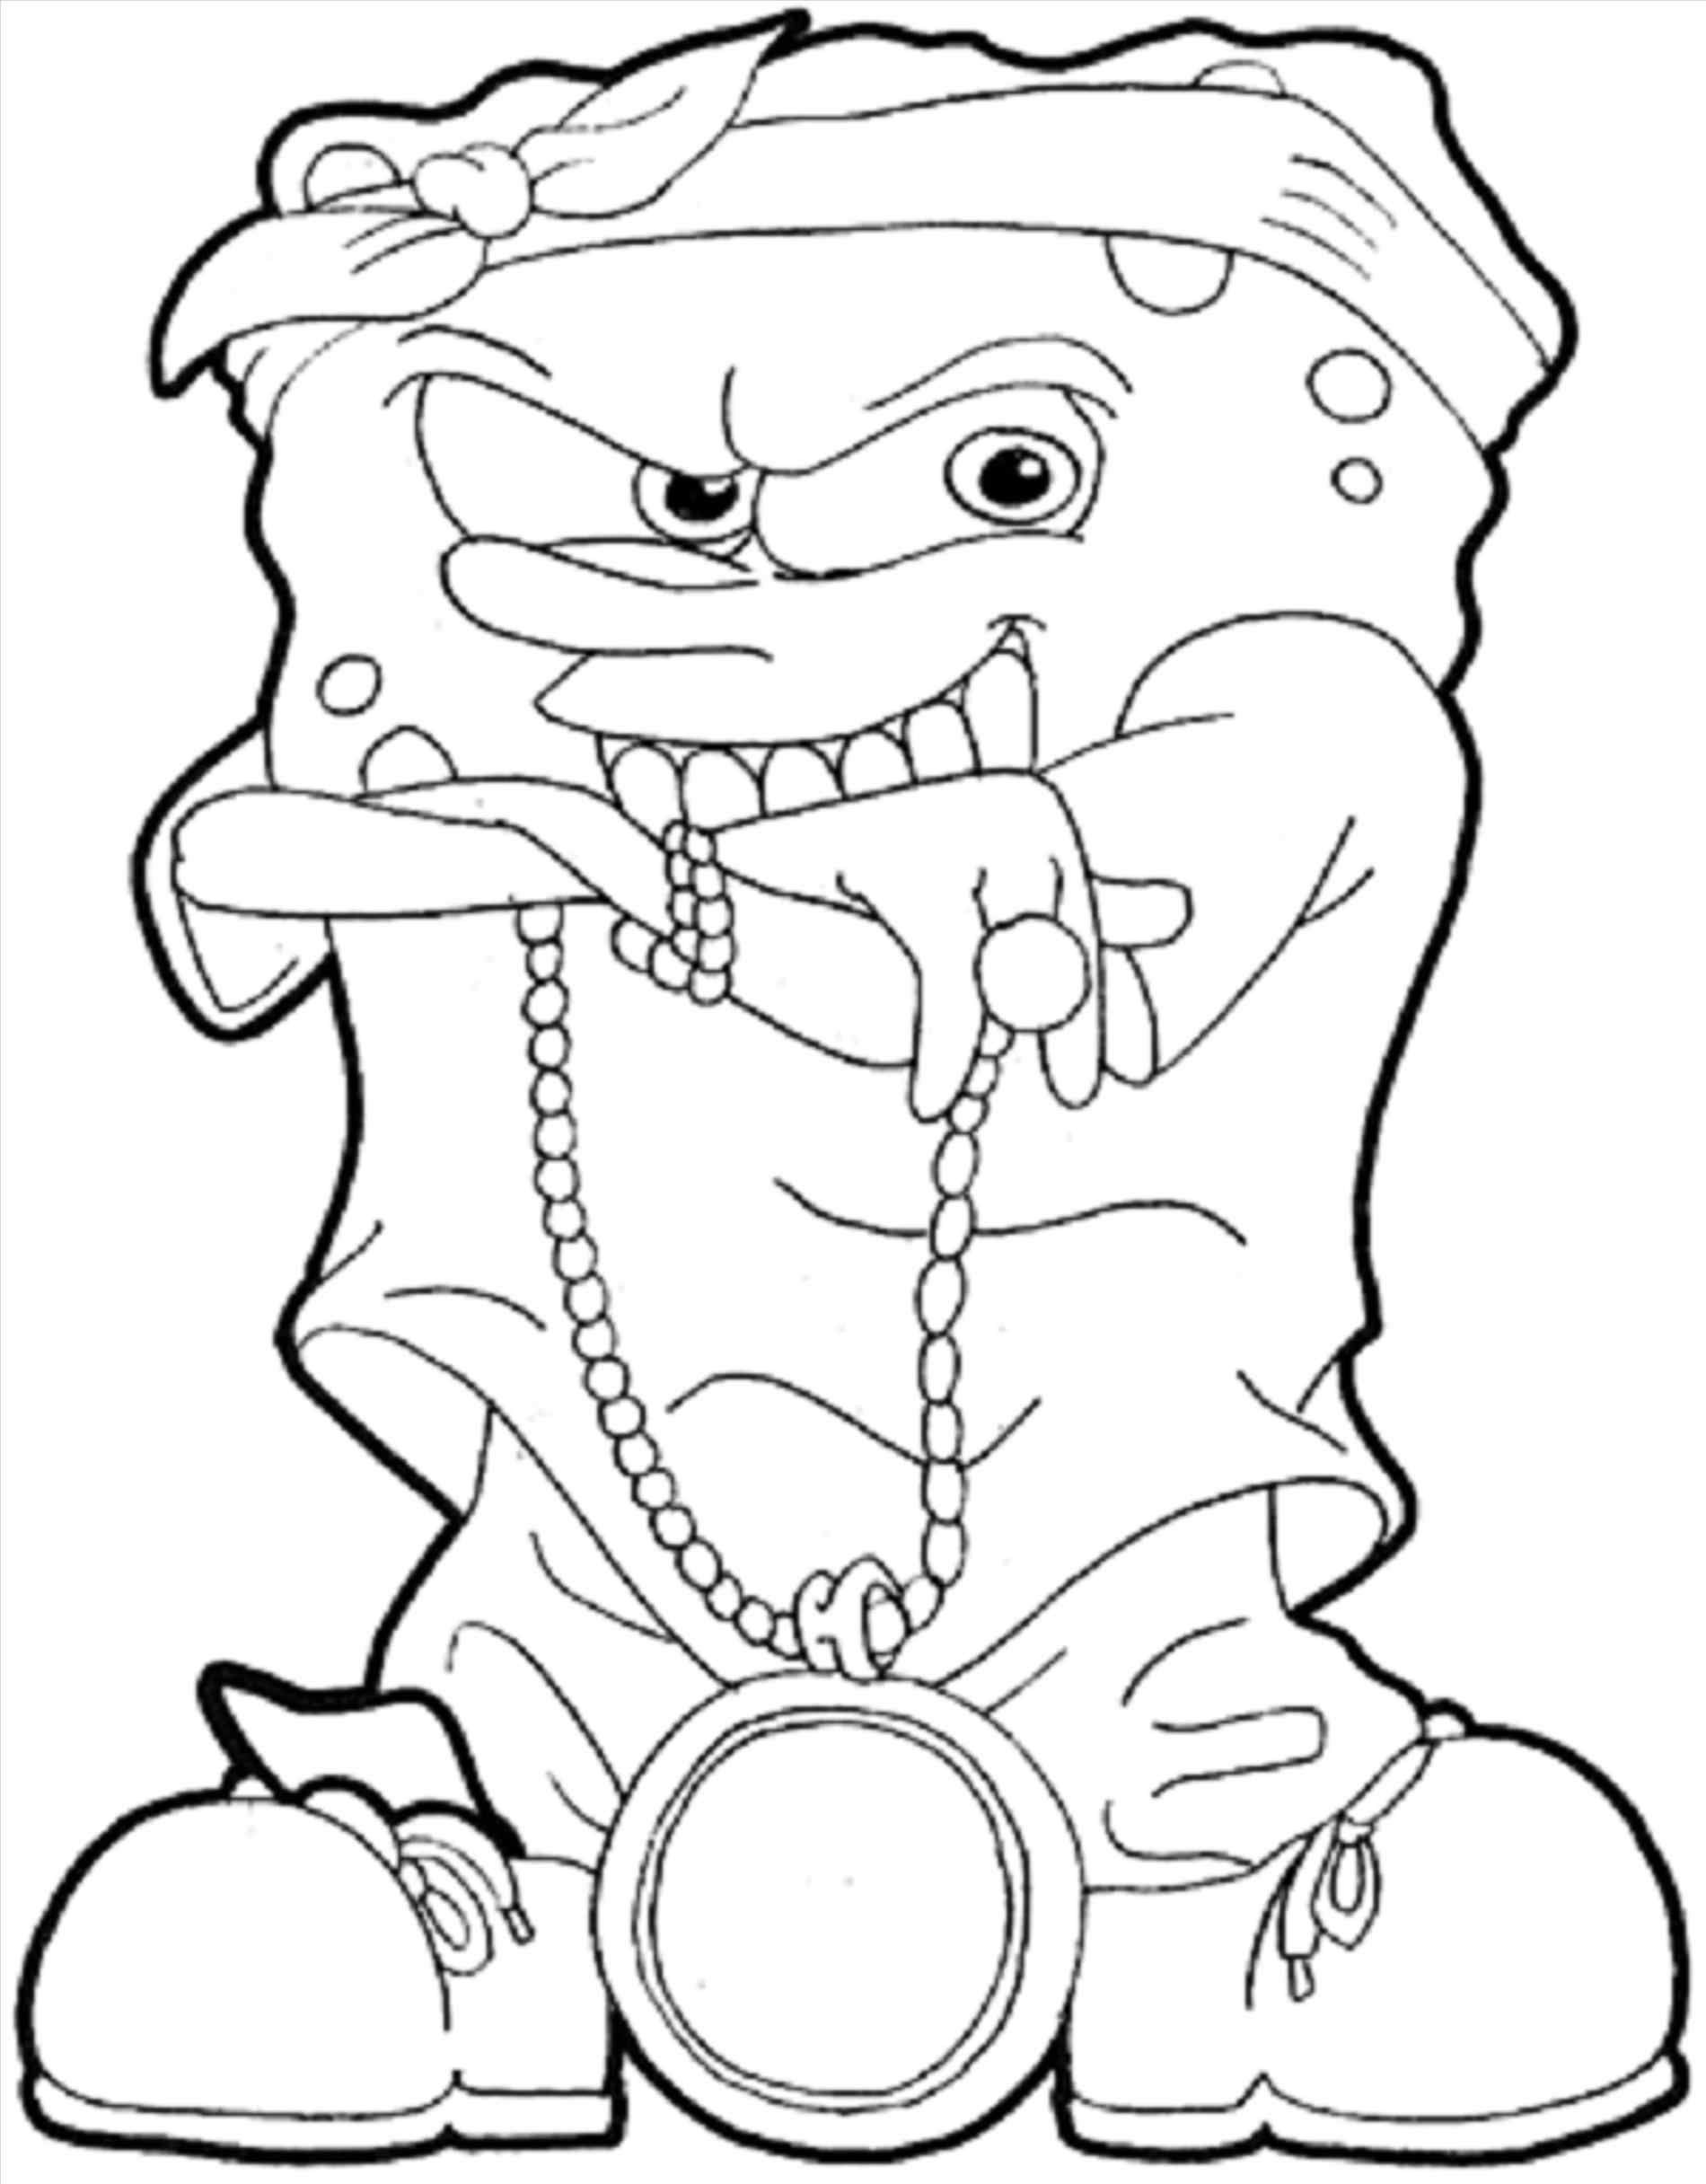 Funny Spongebob Coloring Pages Printables 45